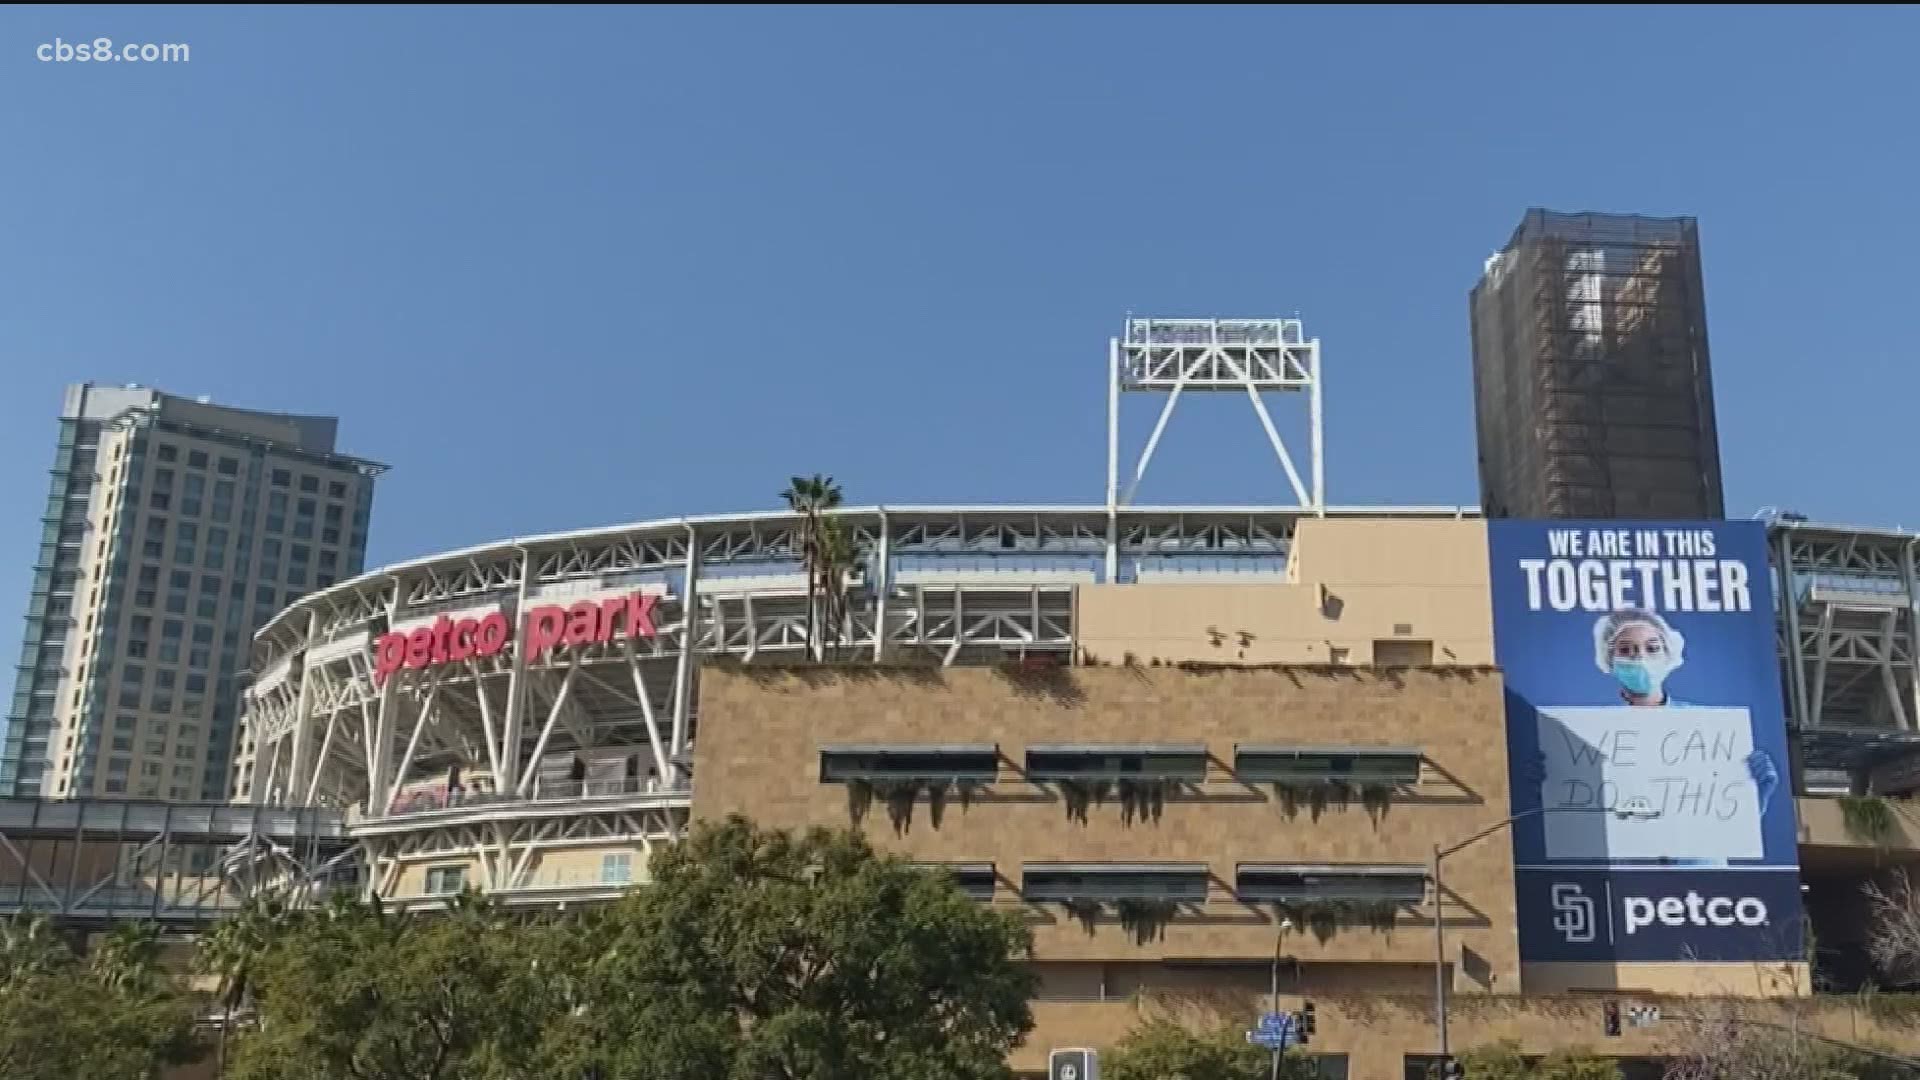 The Vaccination Super Station near Petco Park is an effort to safely vaccinate the 500,000 healthcare workers in the region eligible for Phase 1A-Tier categories.